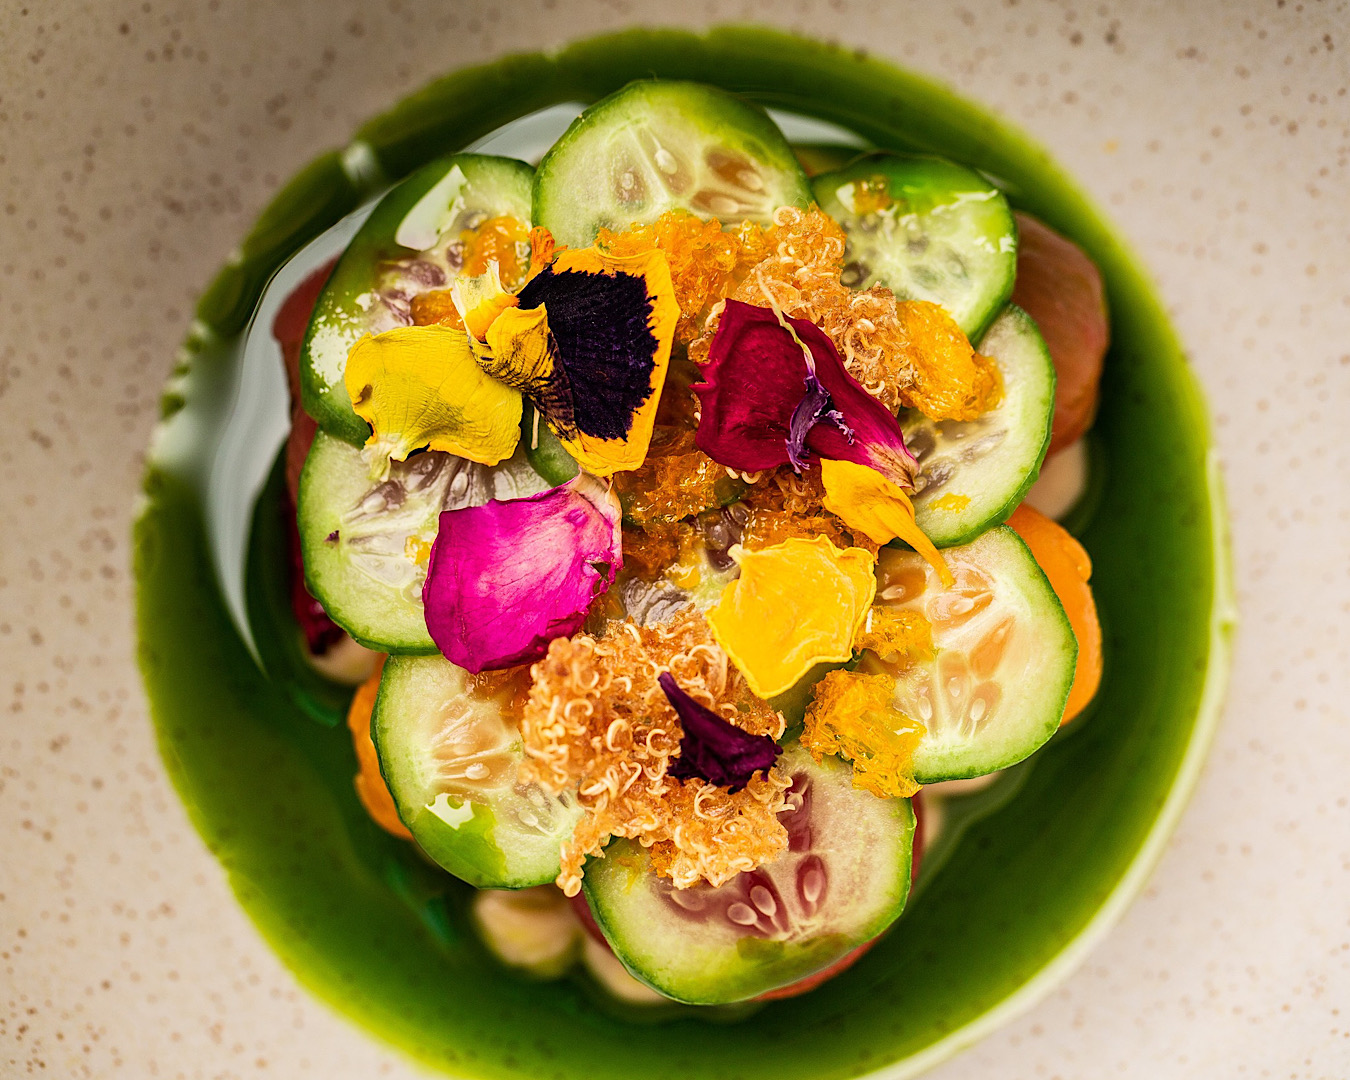 An exquisite green entree from The Sugar Club, one of the best restaurants in Auckland CBD. 